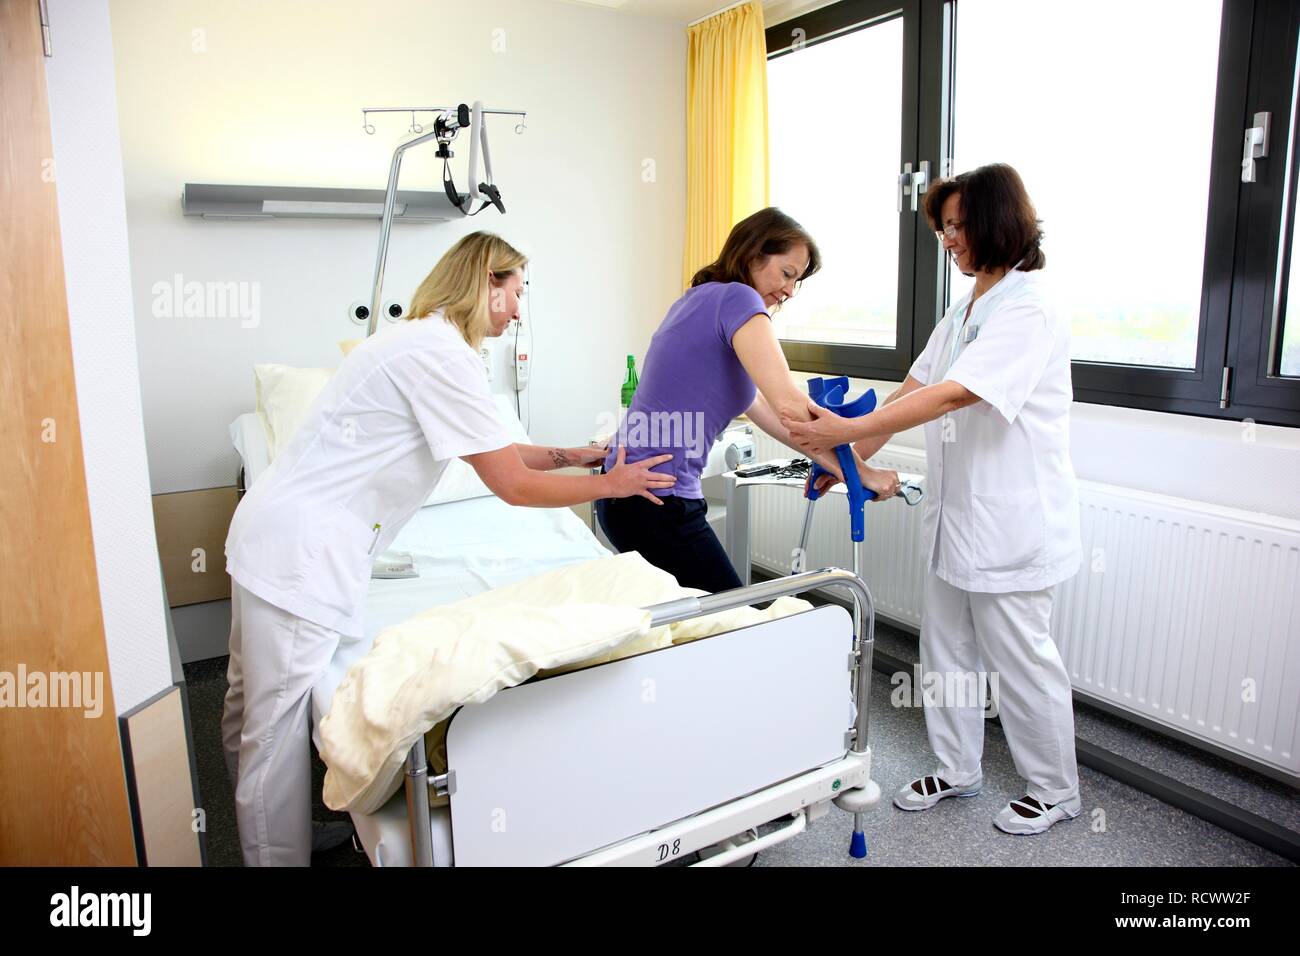 Nurses assisting a patient trying to walk with walking aids, mobilisation after an operation in a hospital Stock Photo